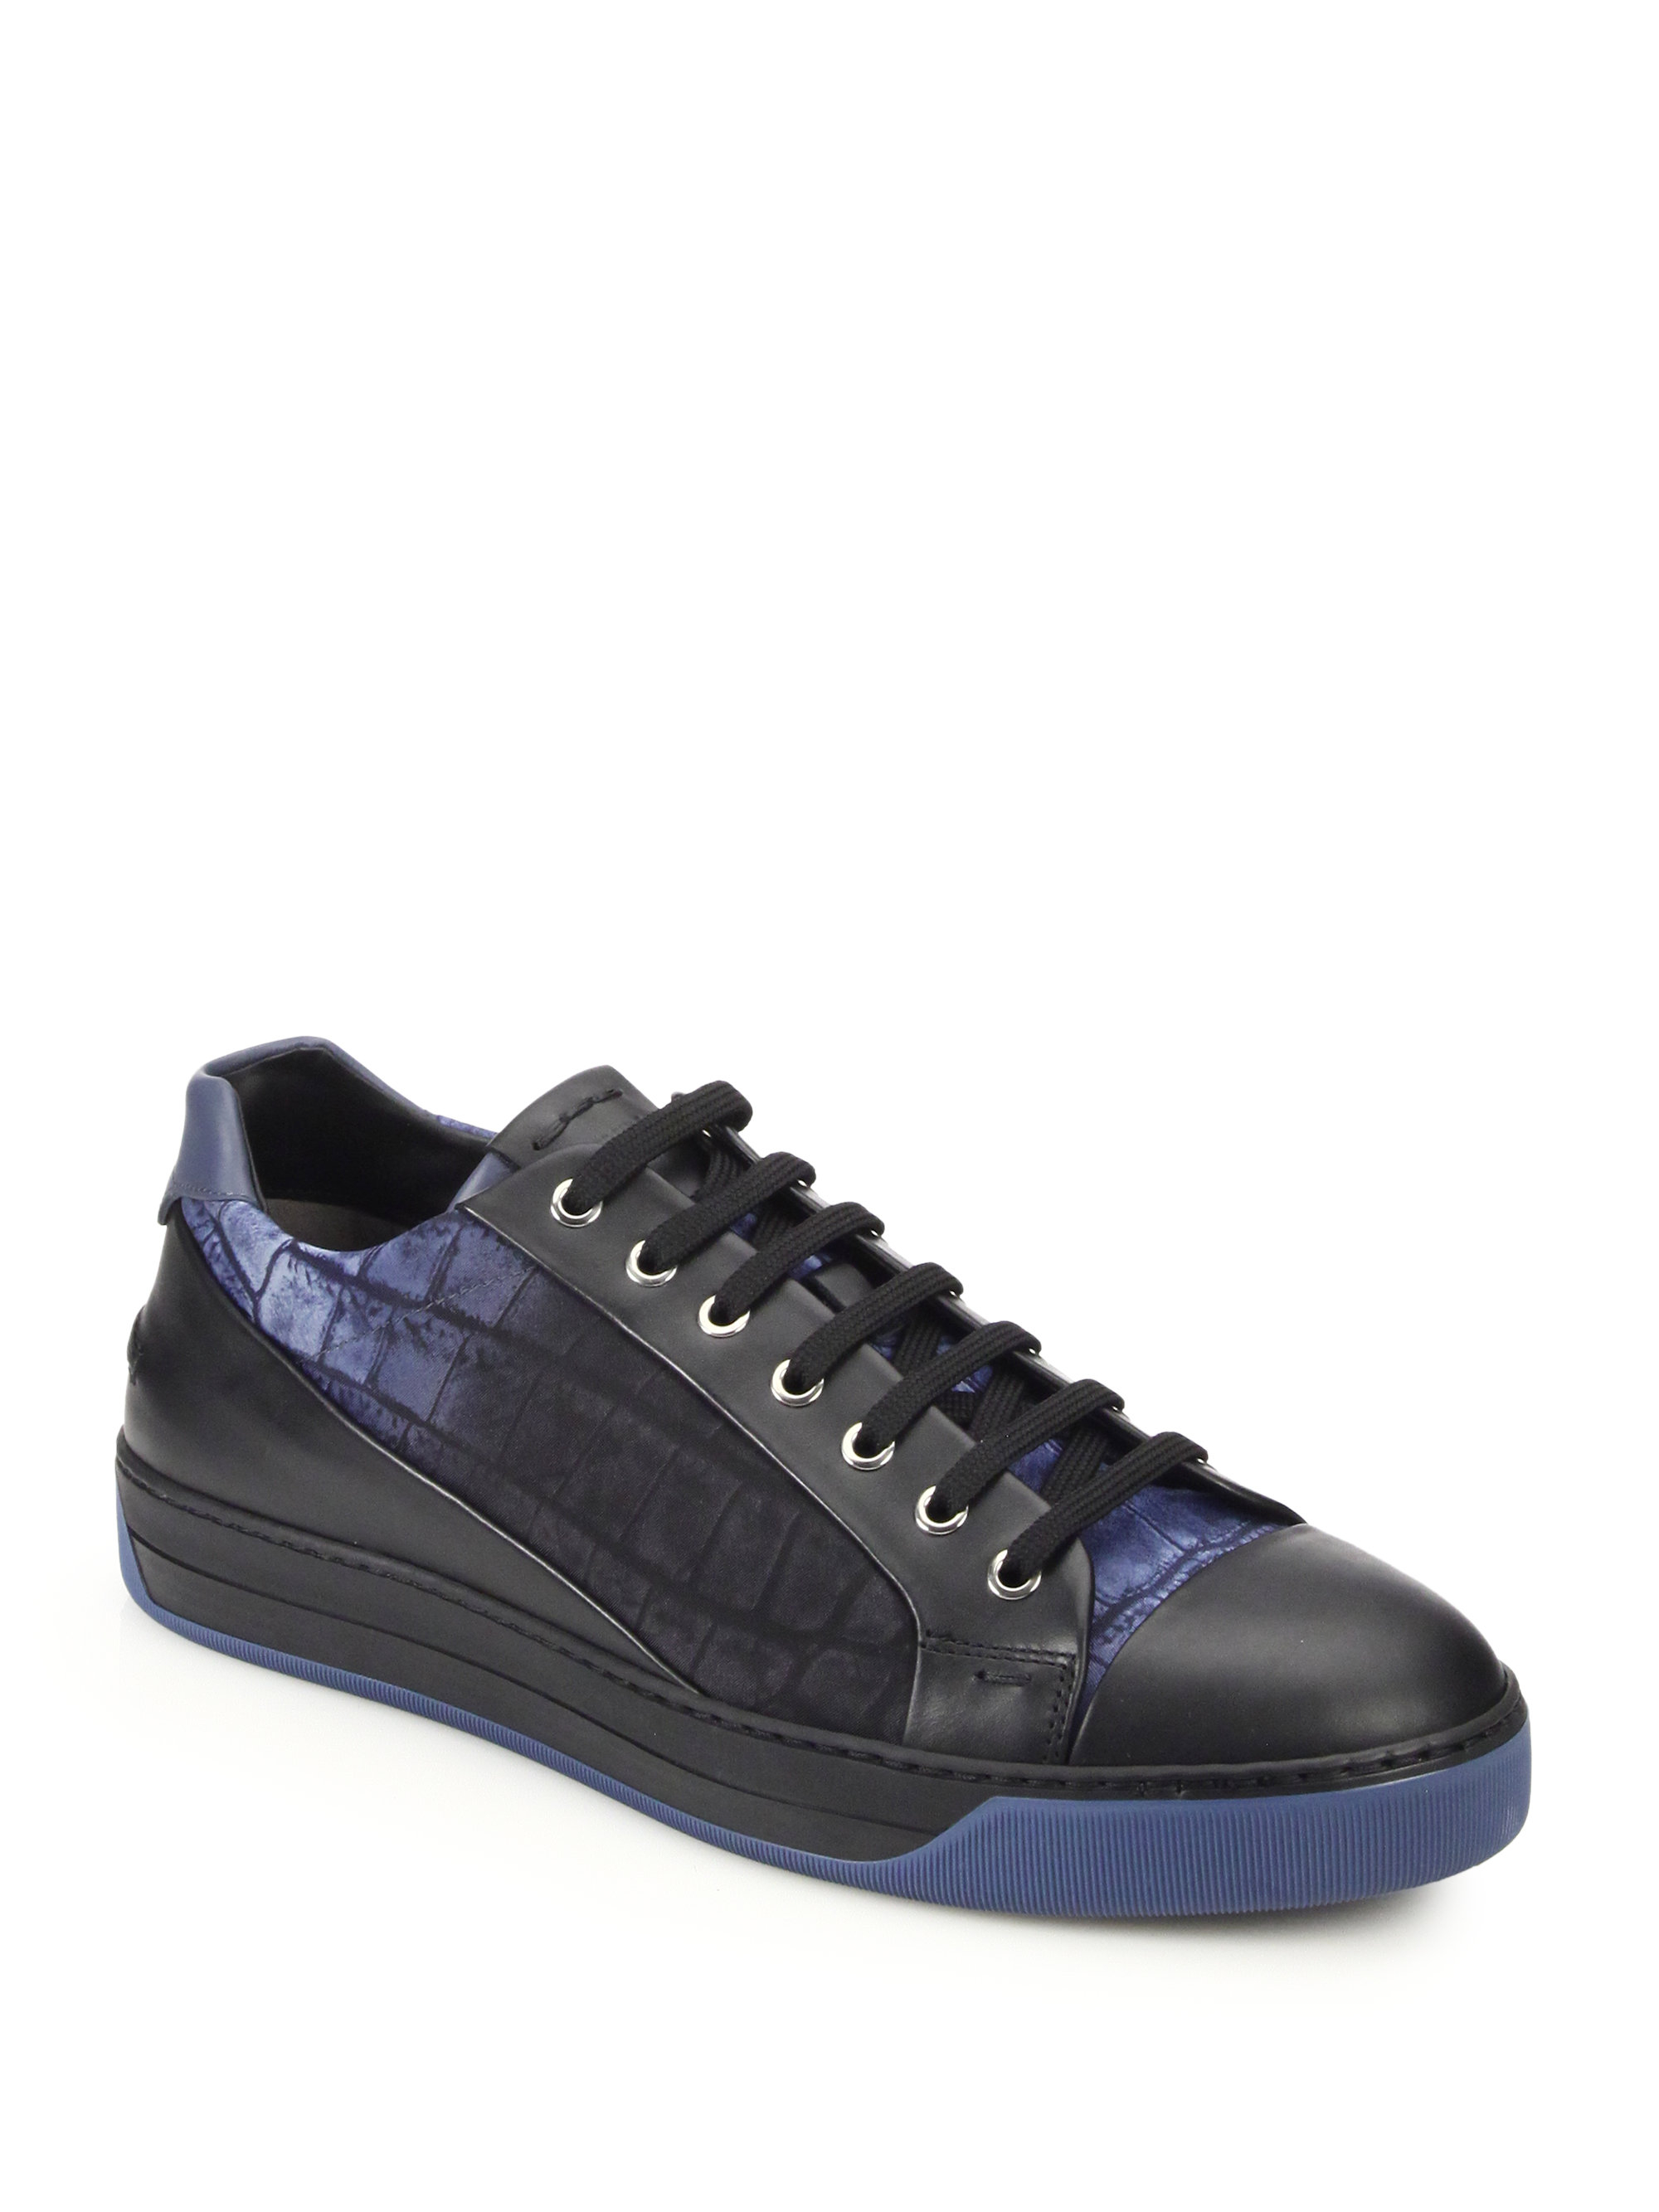 Fendi Croc-embossed Canvas & Leather Lace-up Sneakers in Blue (BLUE ...